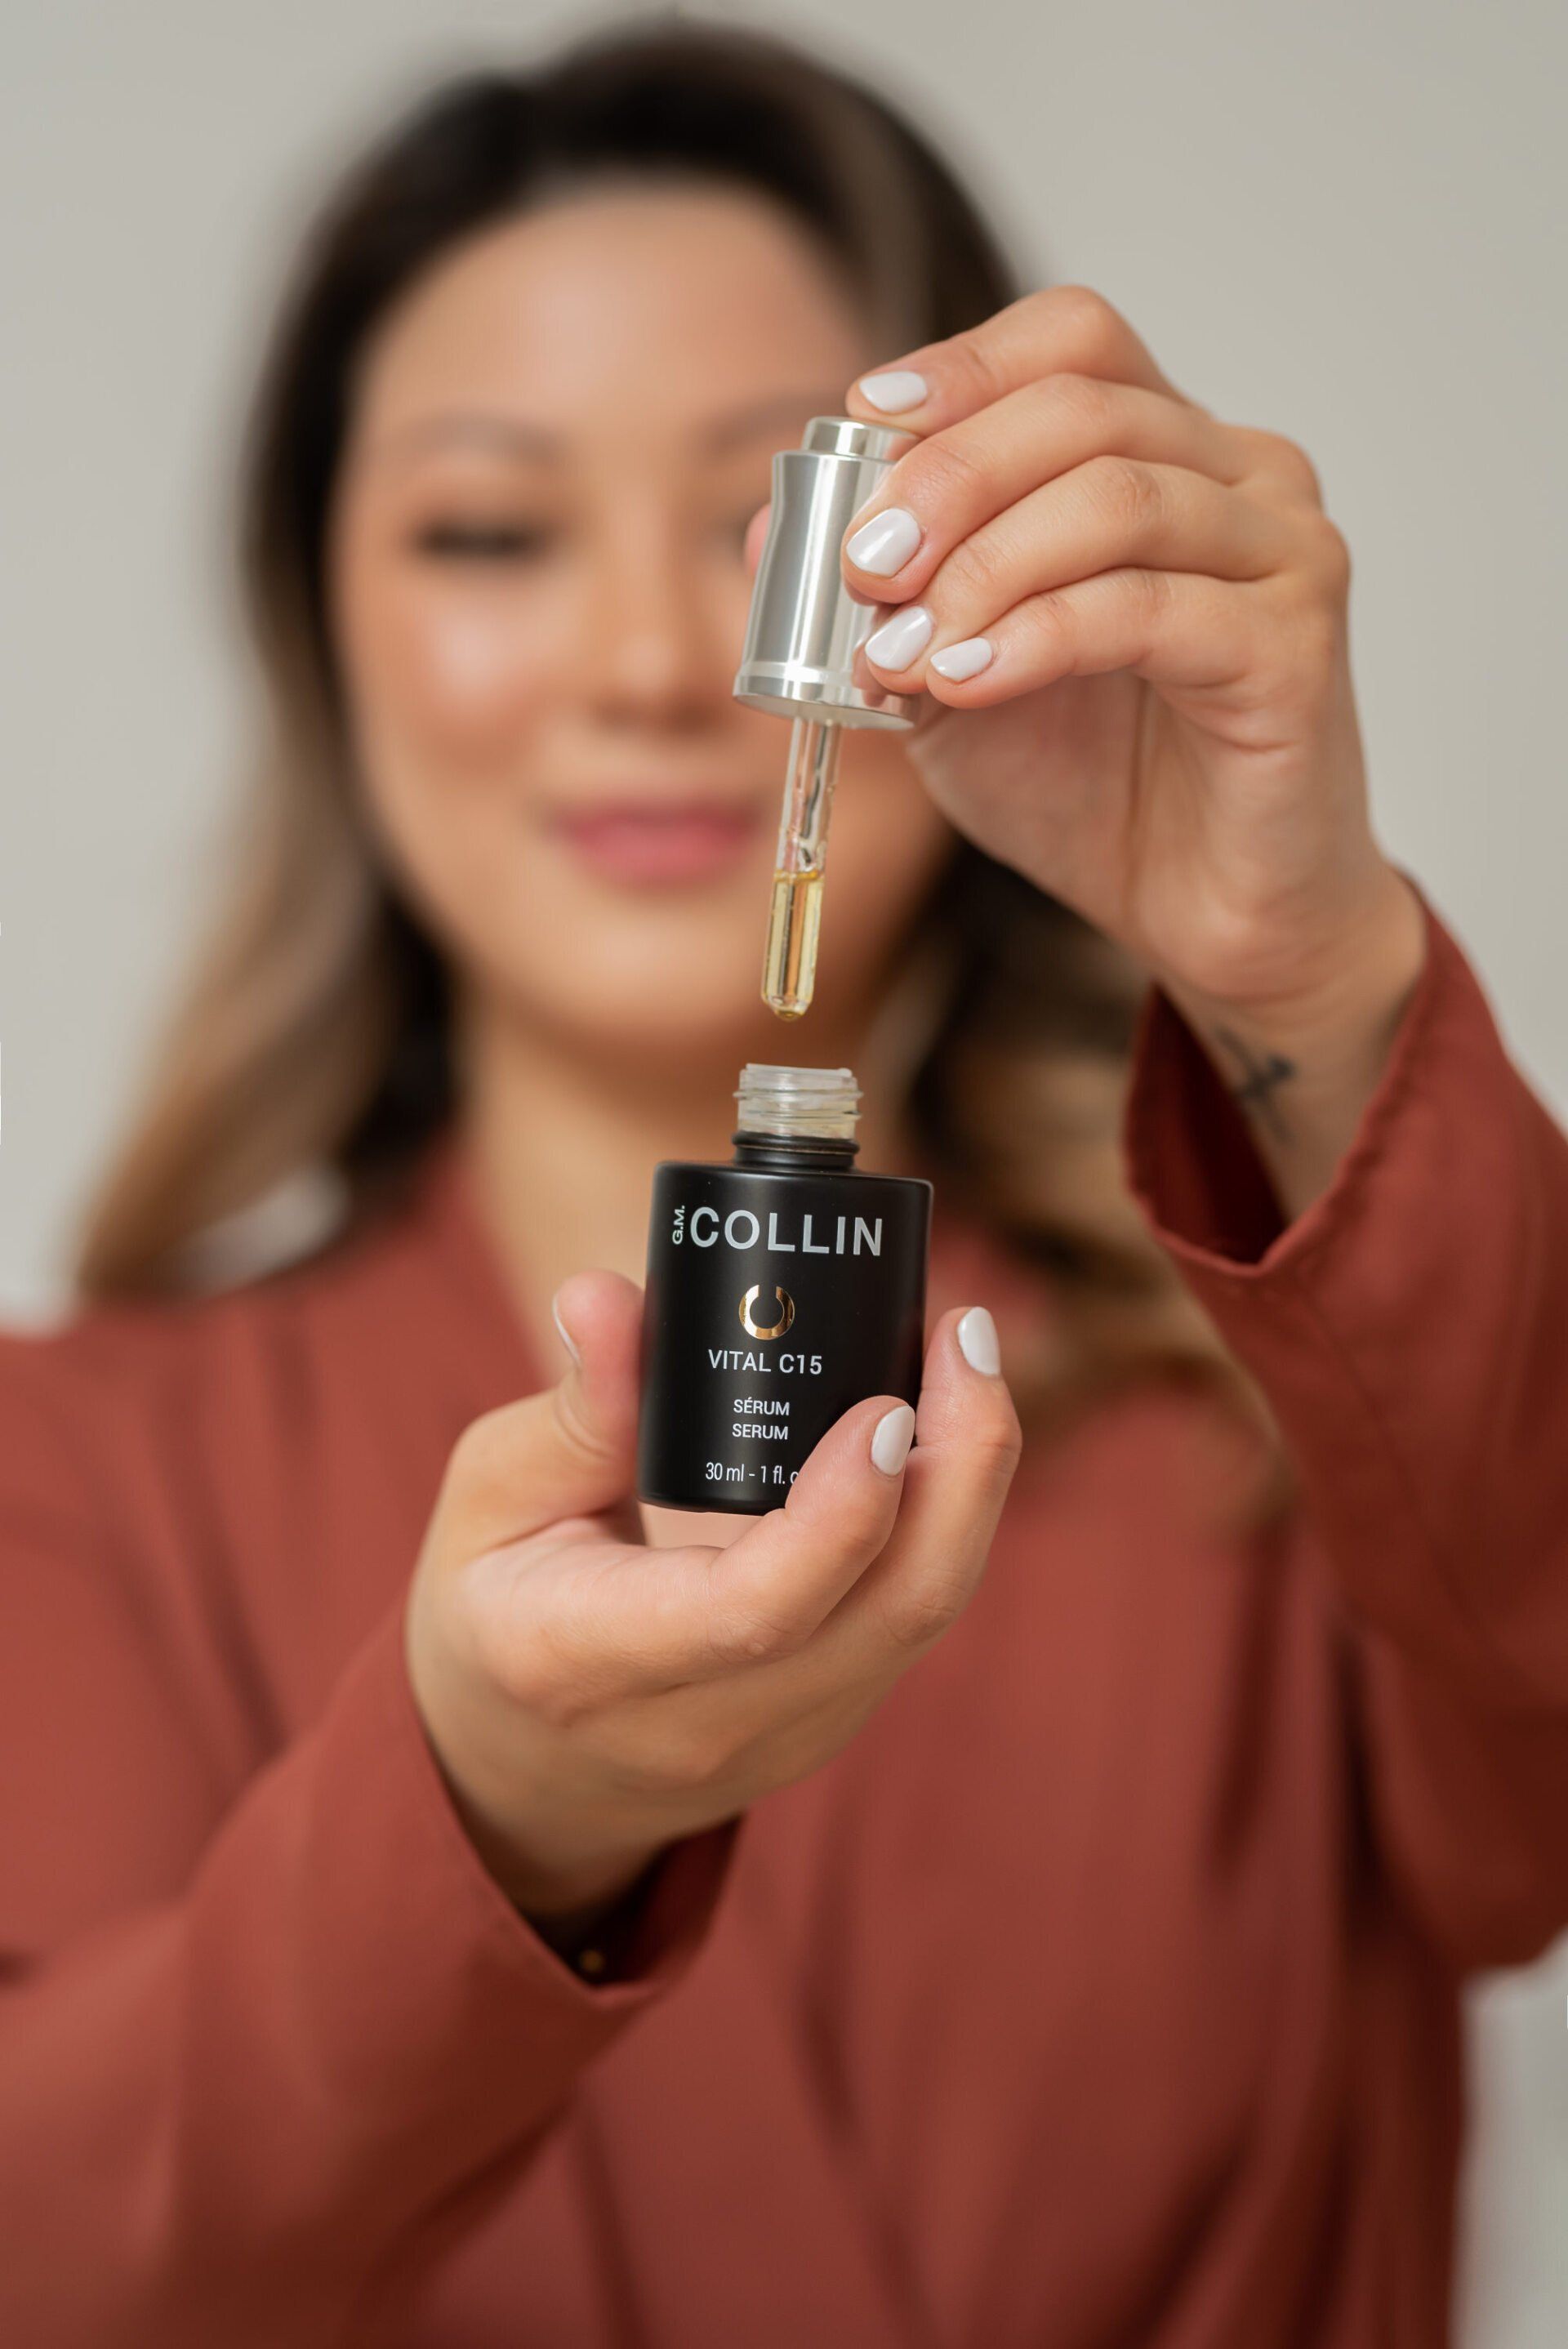 Woman holding a skincare serum product bottle for branding photo